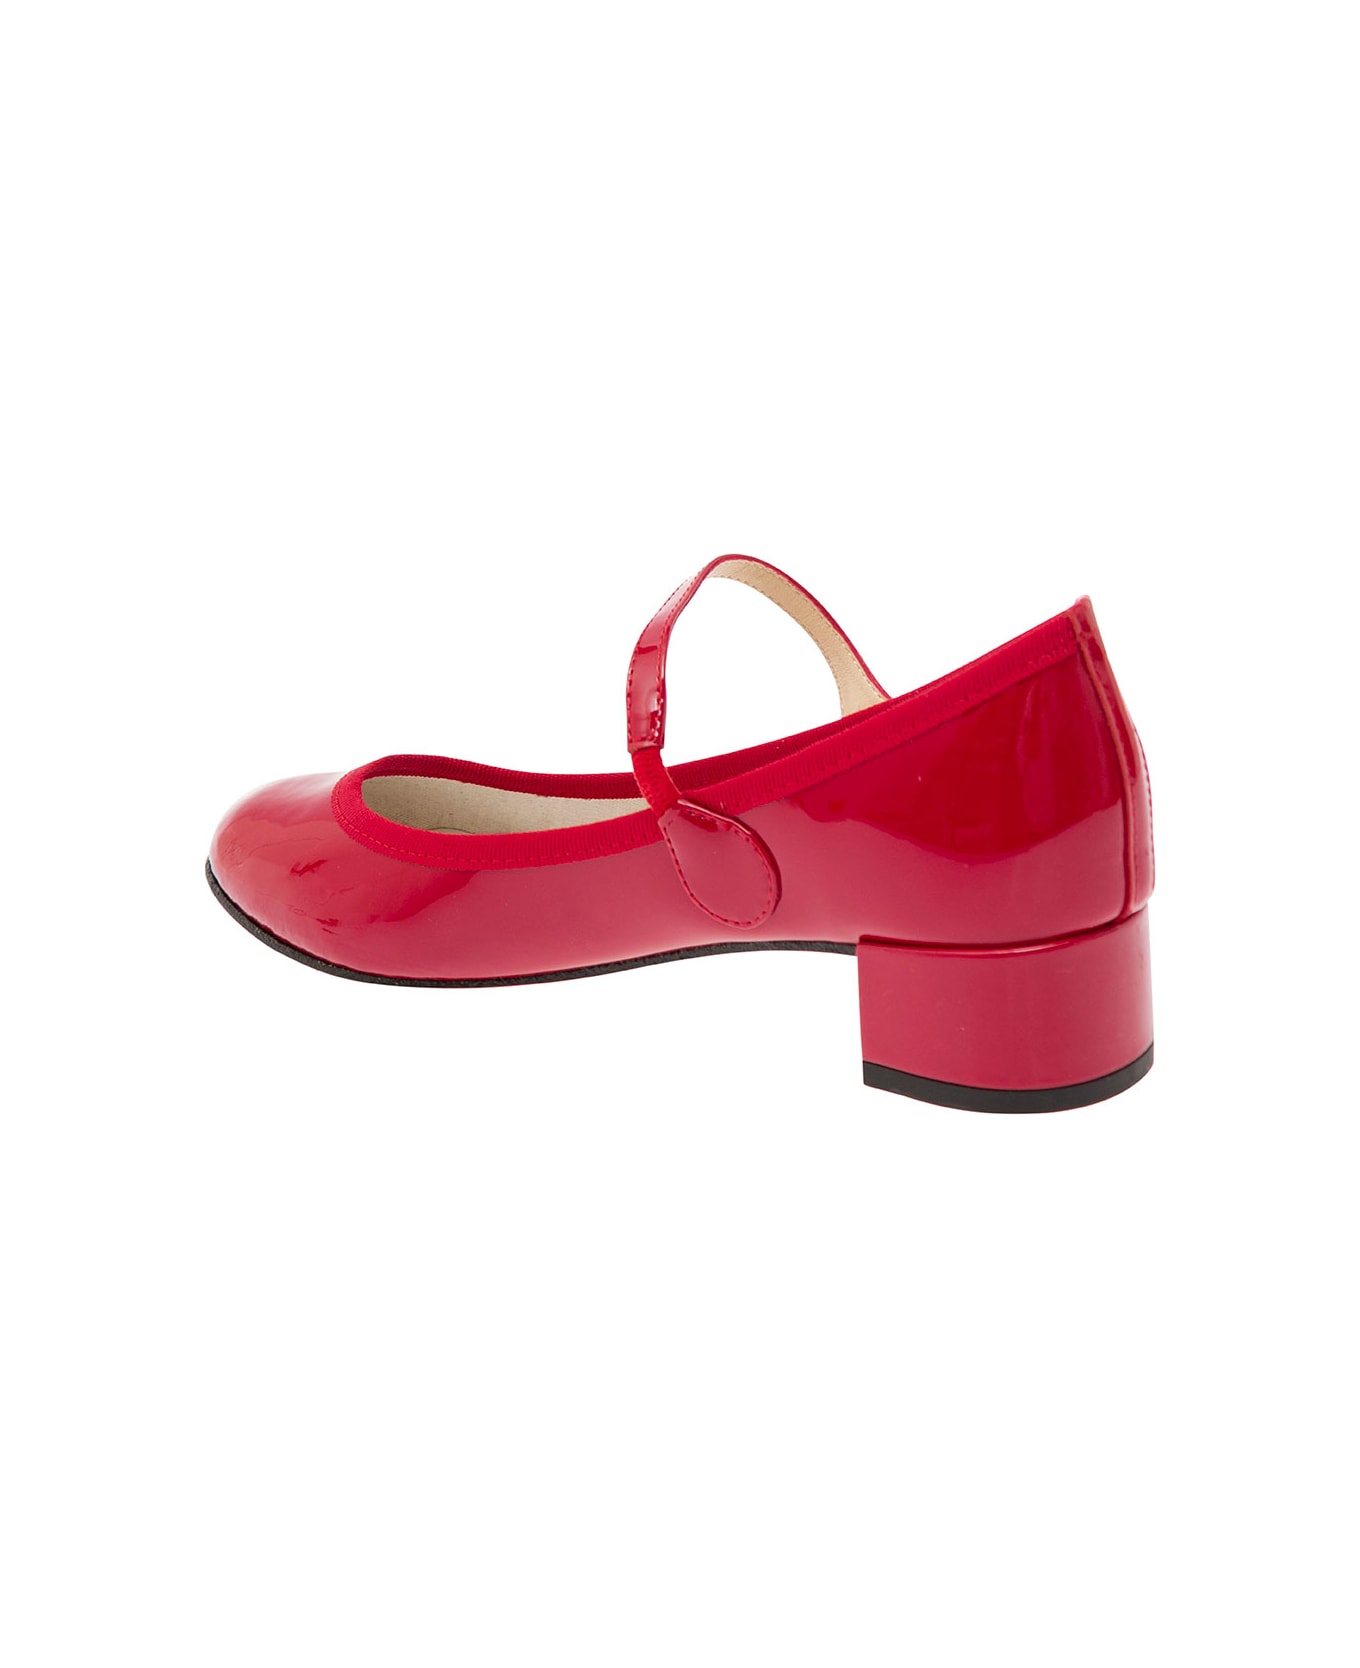 Repetto 'rose' Red Mary Janes With Strap In Patent Leather Woman - Red